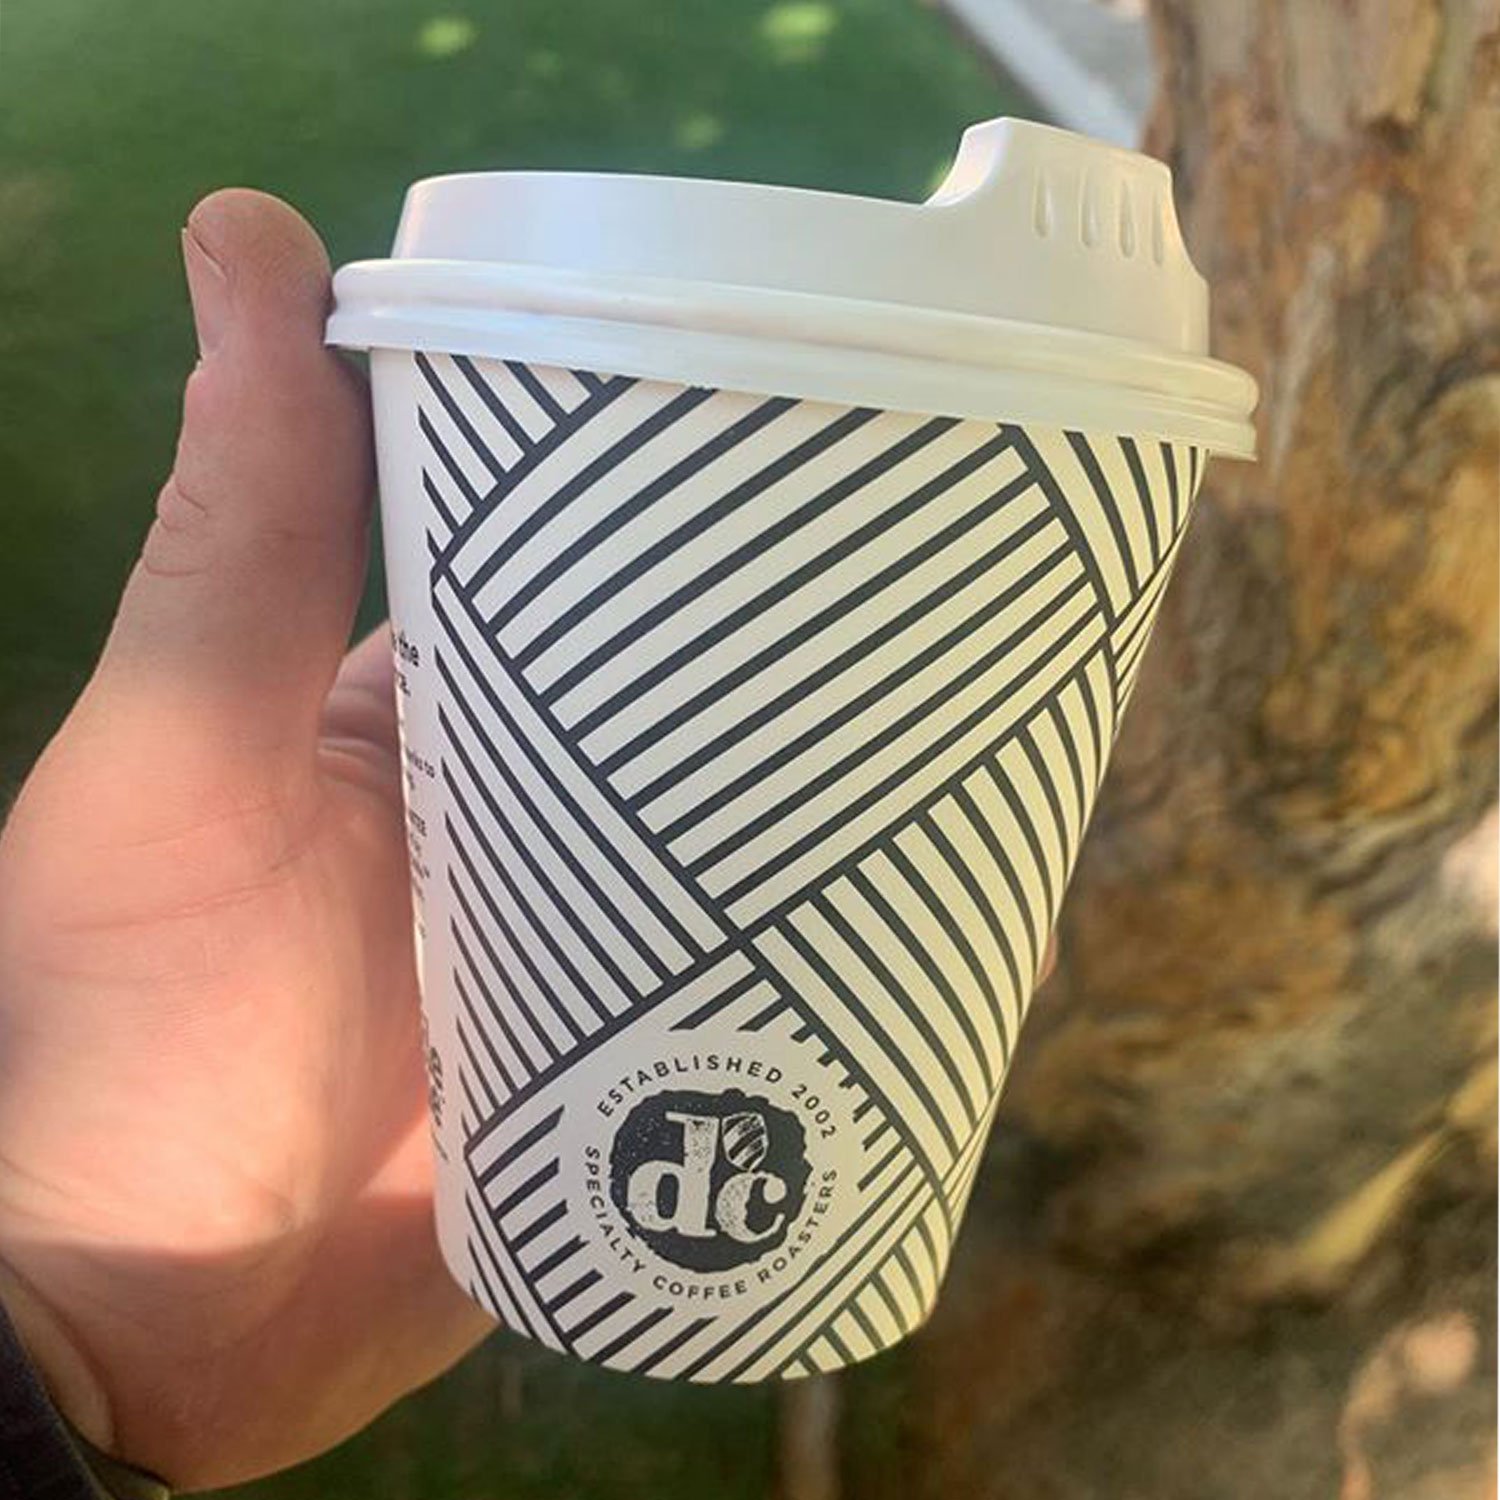 Image of DC Specialty coffee cup